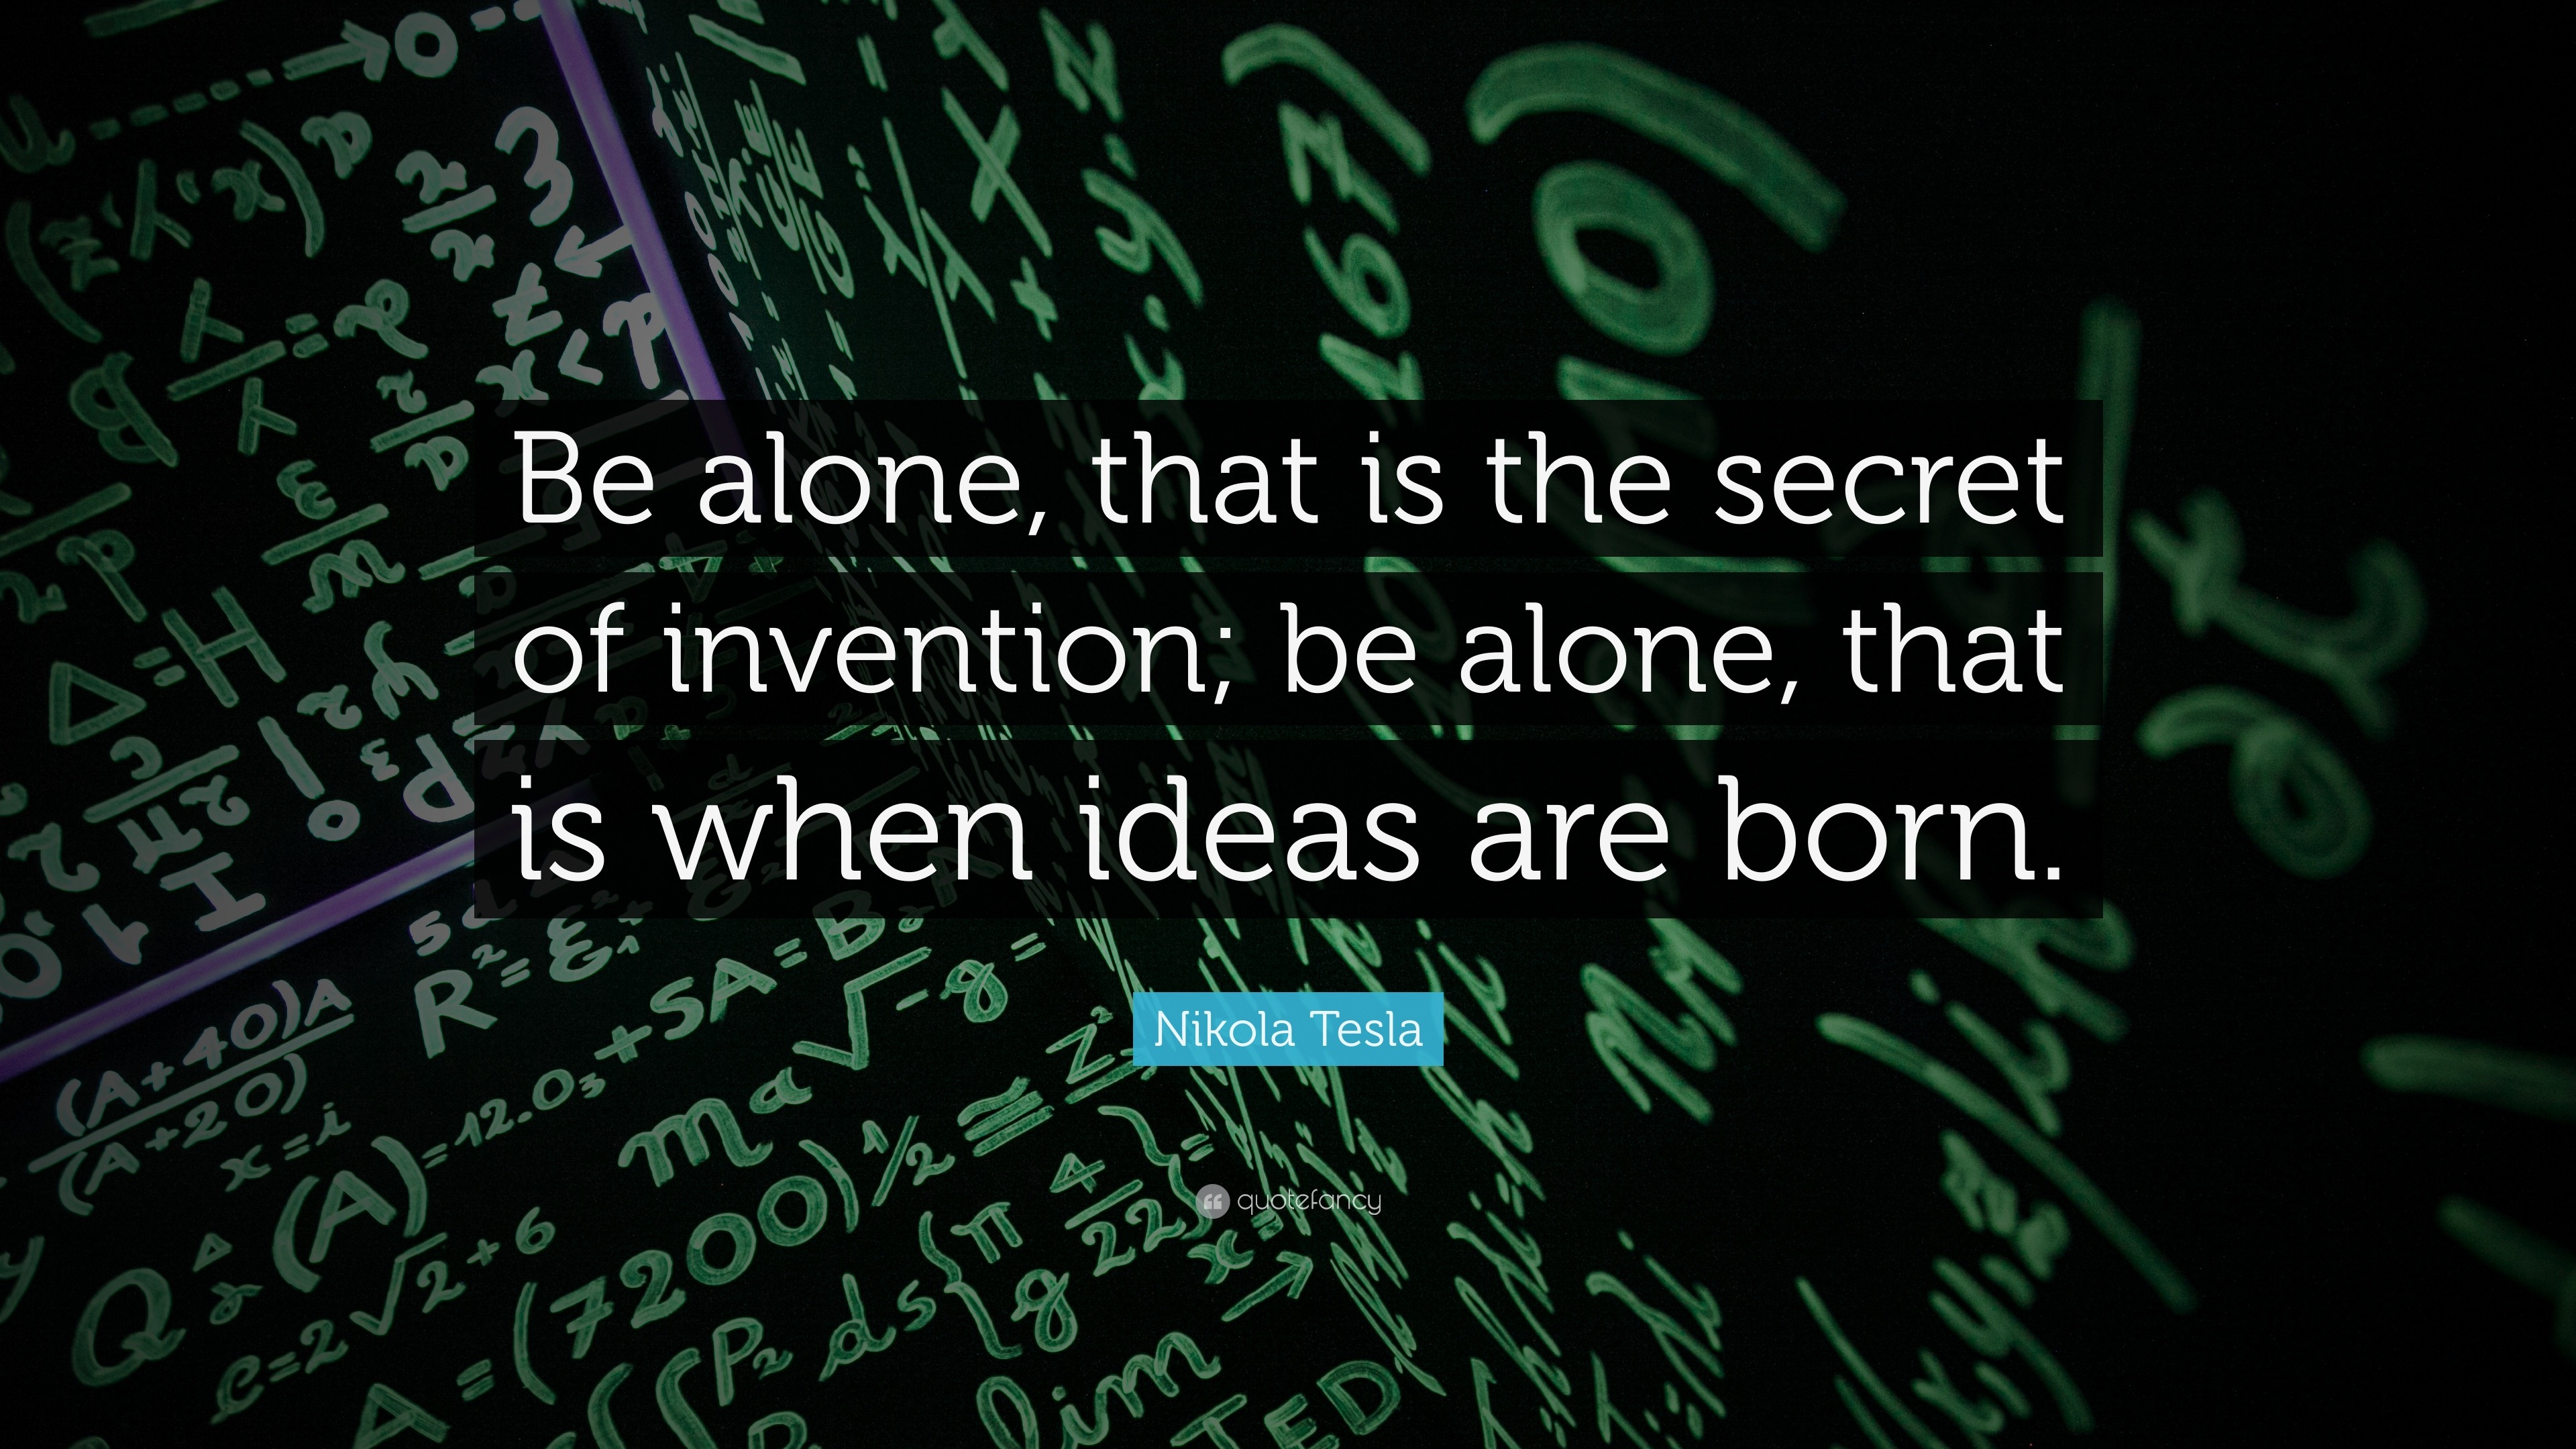 Nikola Tesla Quote: “Be alone, that is the secret of invention; be alone,  that is when